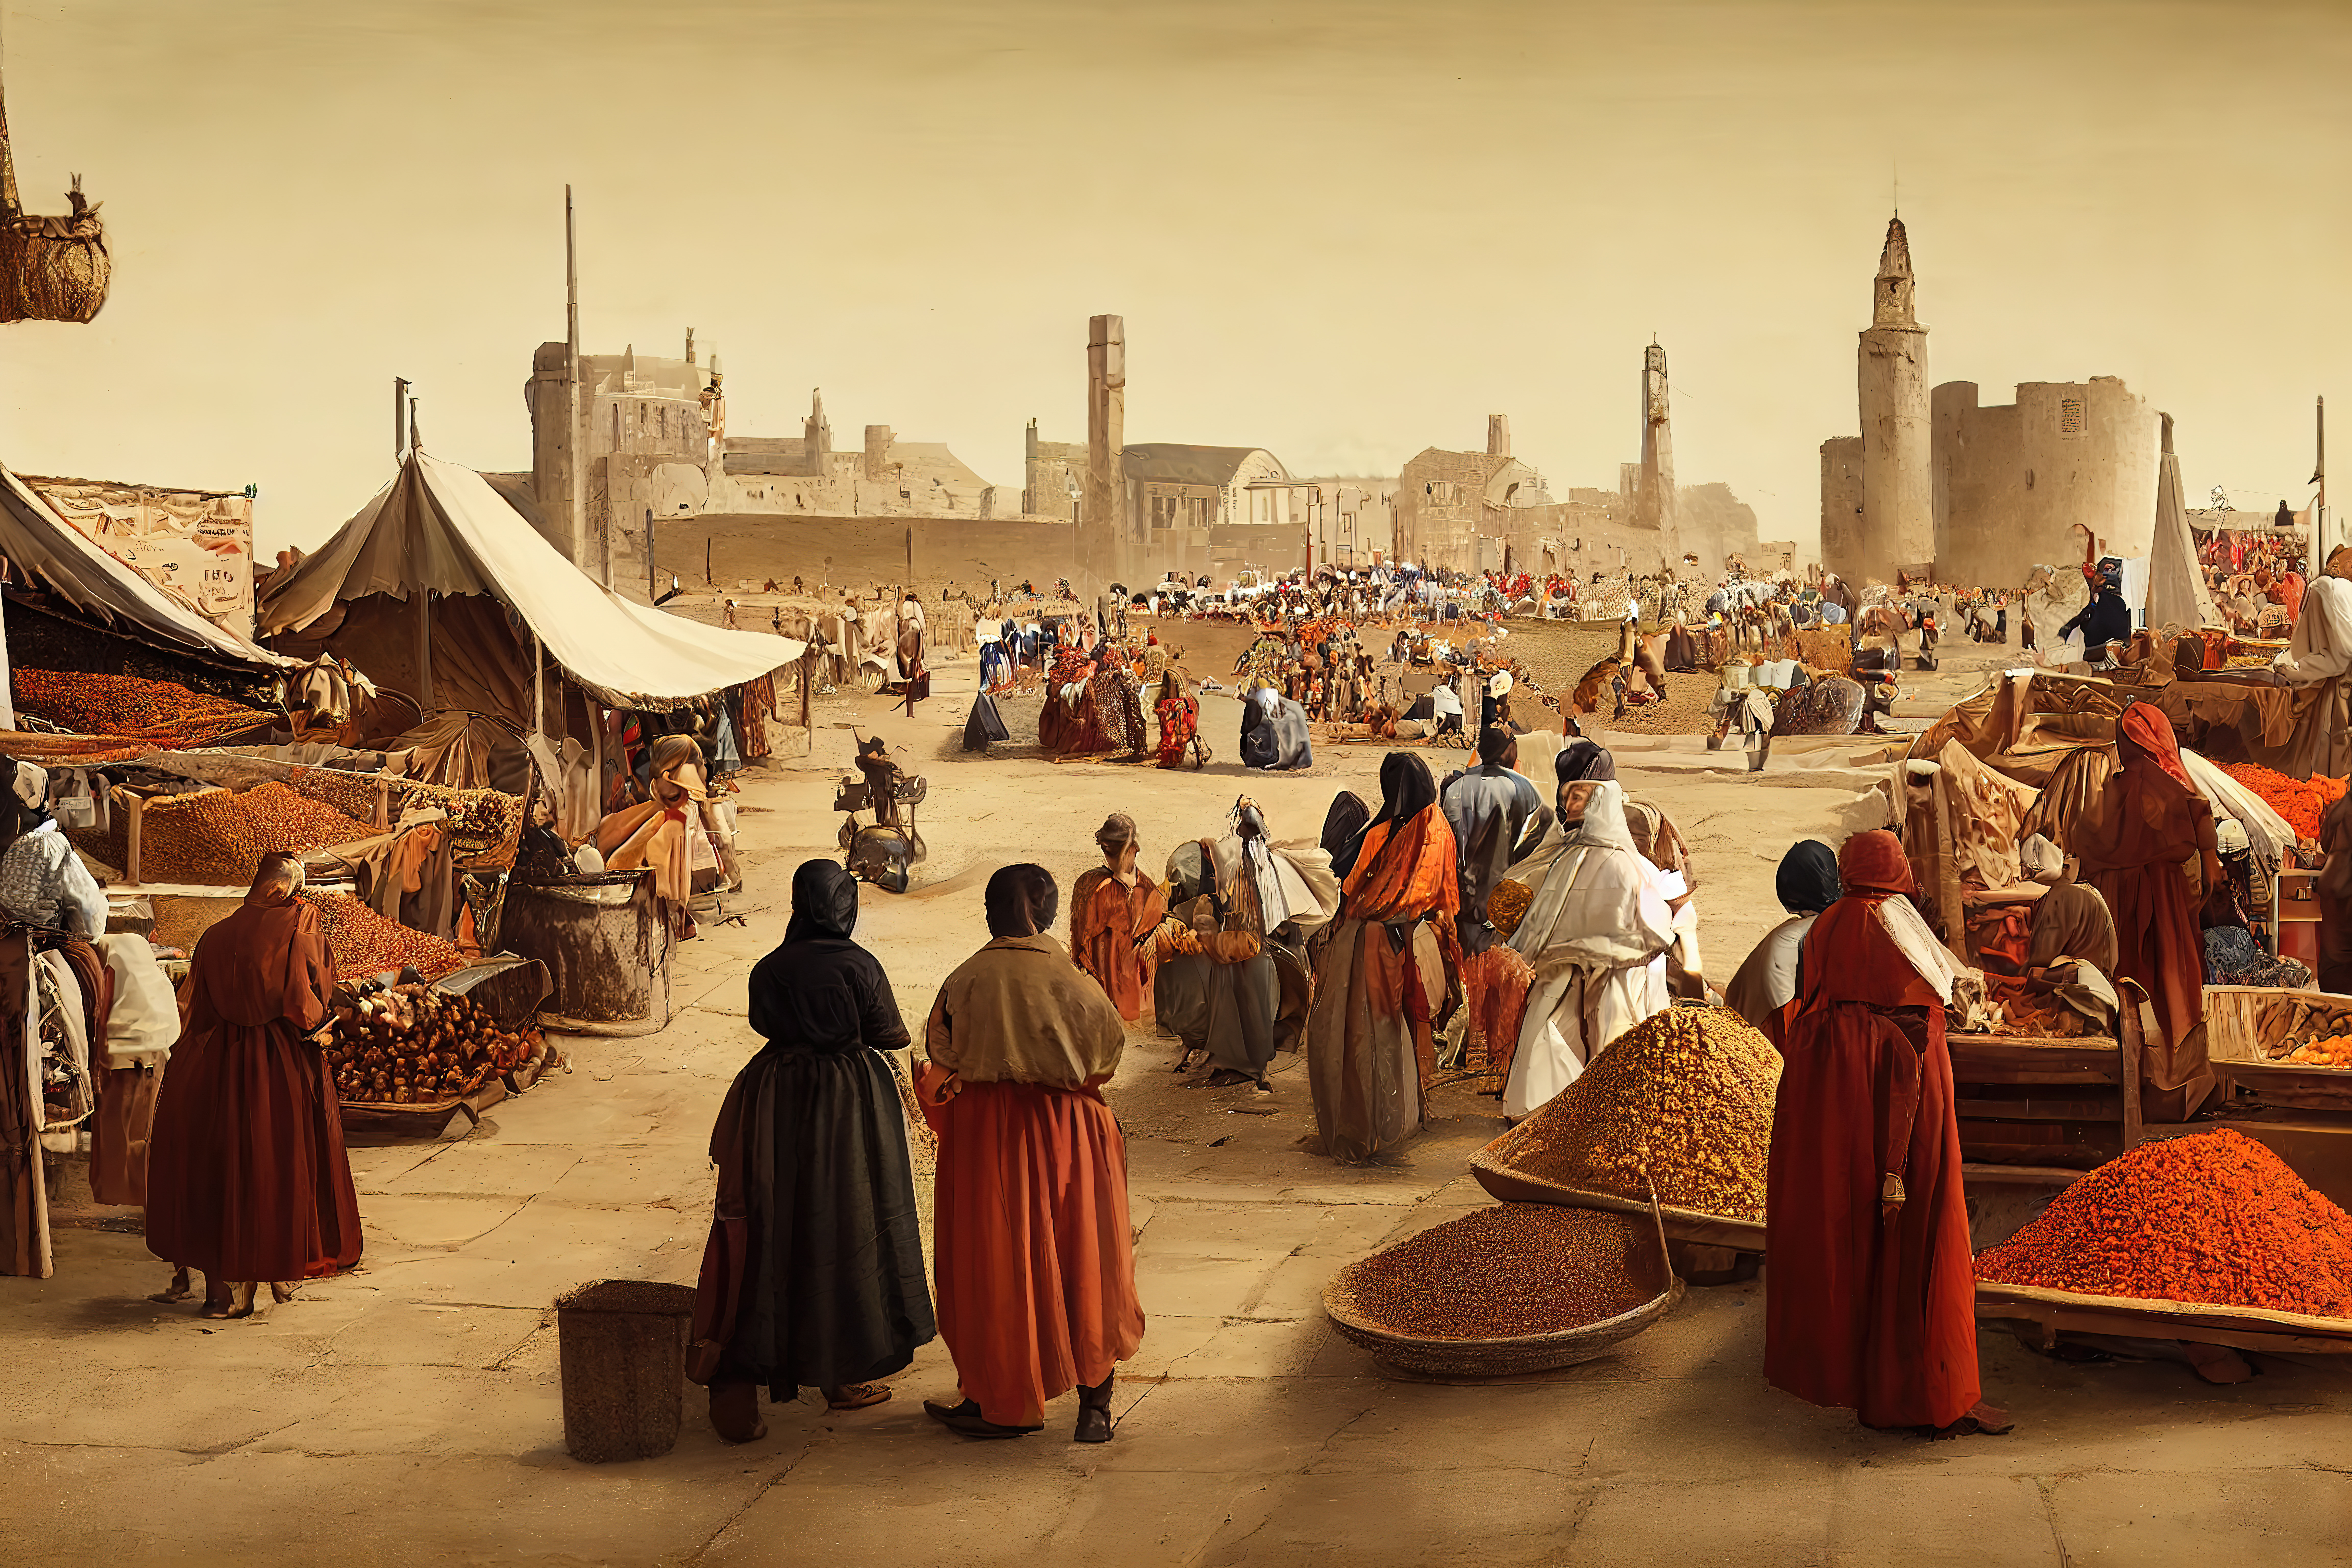 Historical recreation of a European medieval town square market with crowds of people buying and trading spices imported from the middle east. Spice market in the middle ages with antique shops.